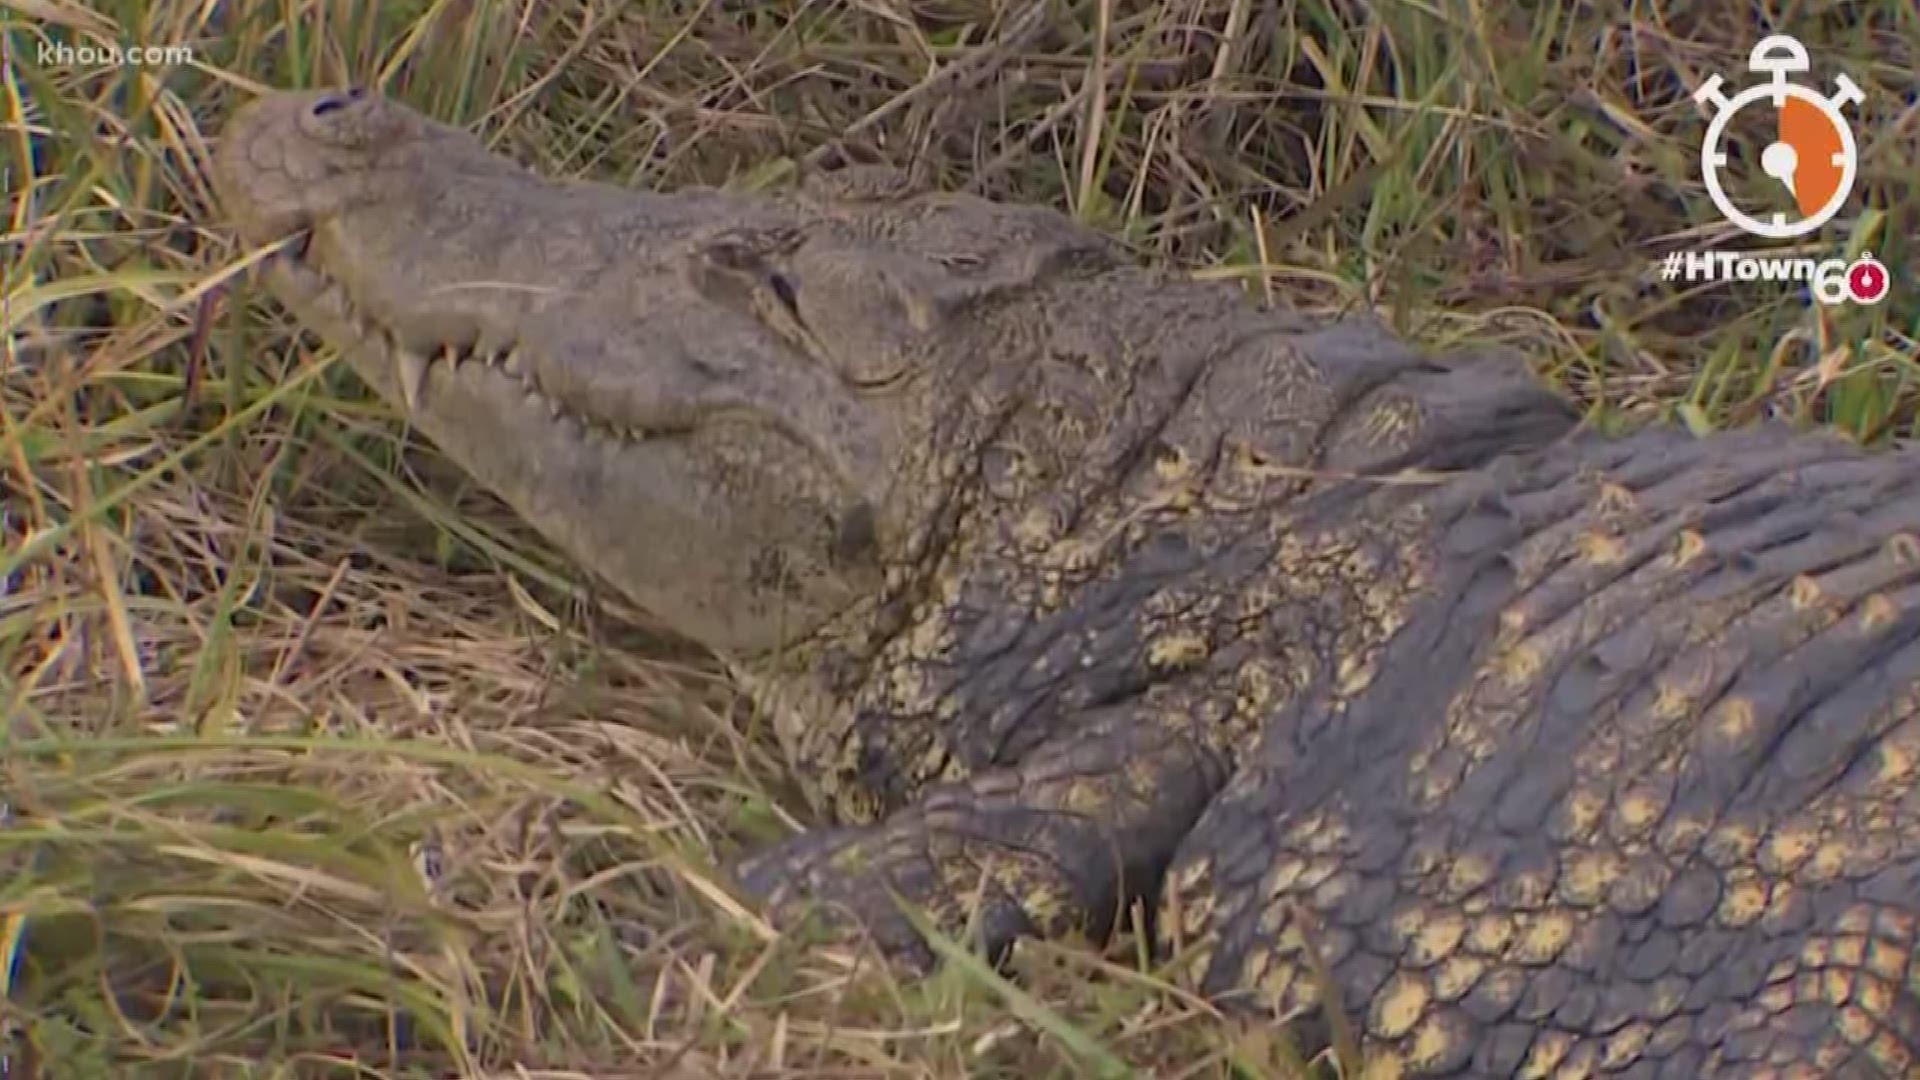 In this morning's HTown60, our Michelle Choi shows where you can go see alligators in a safe environment.